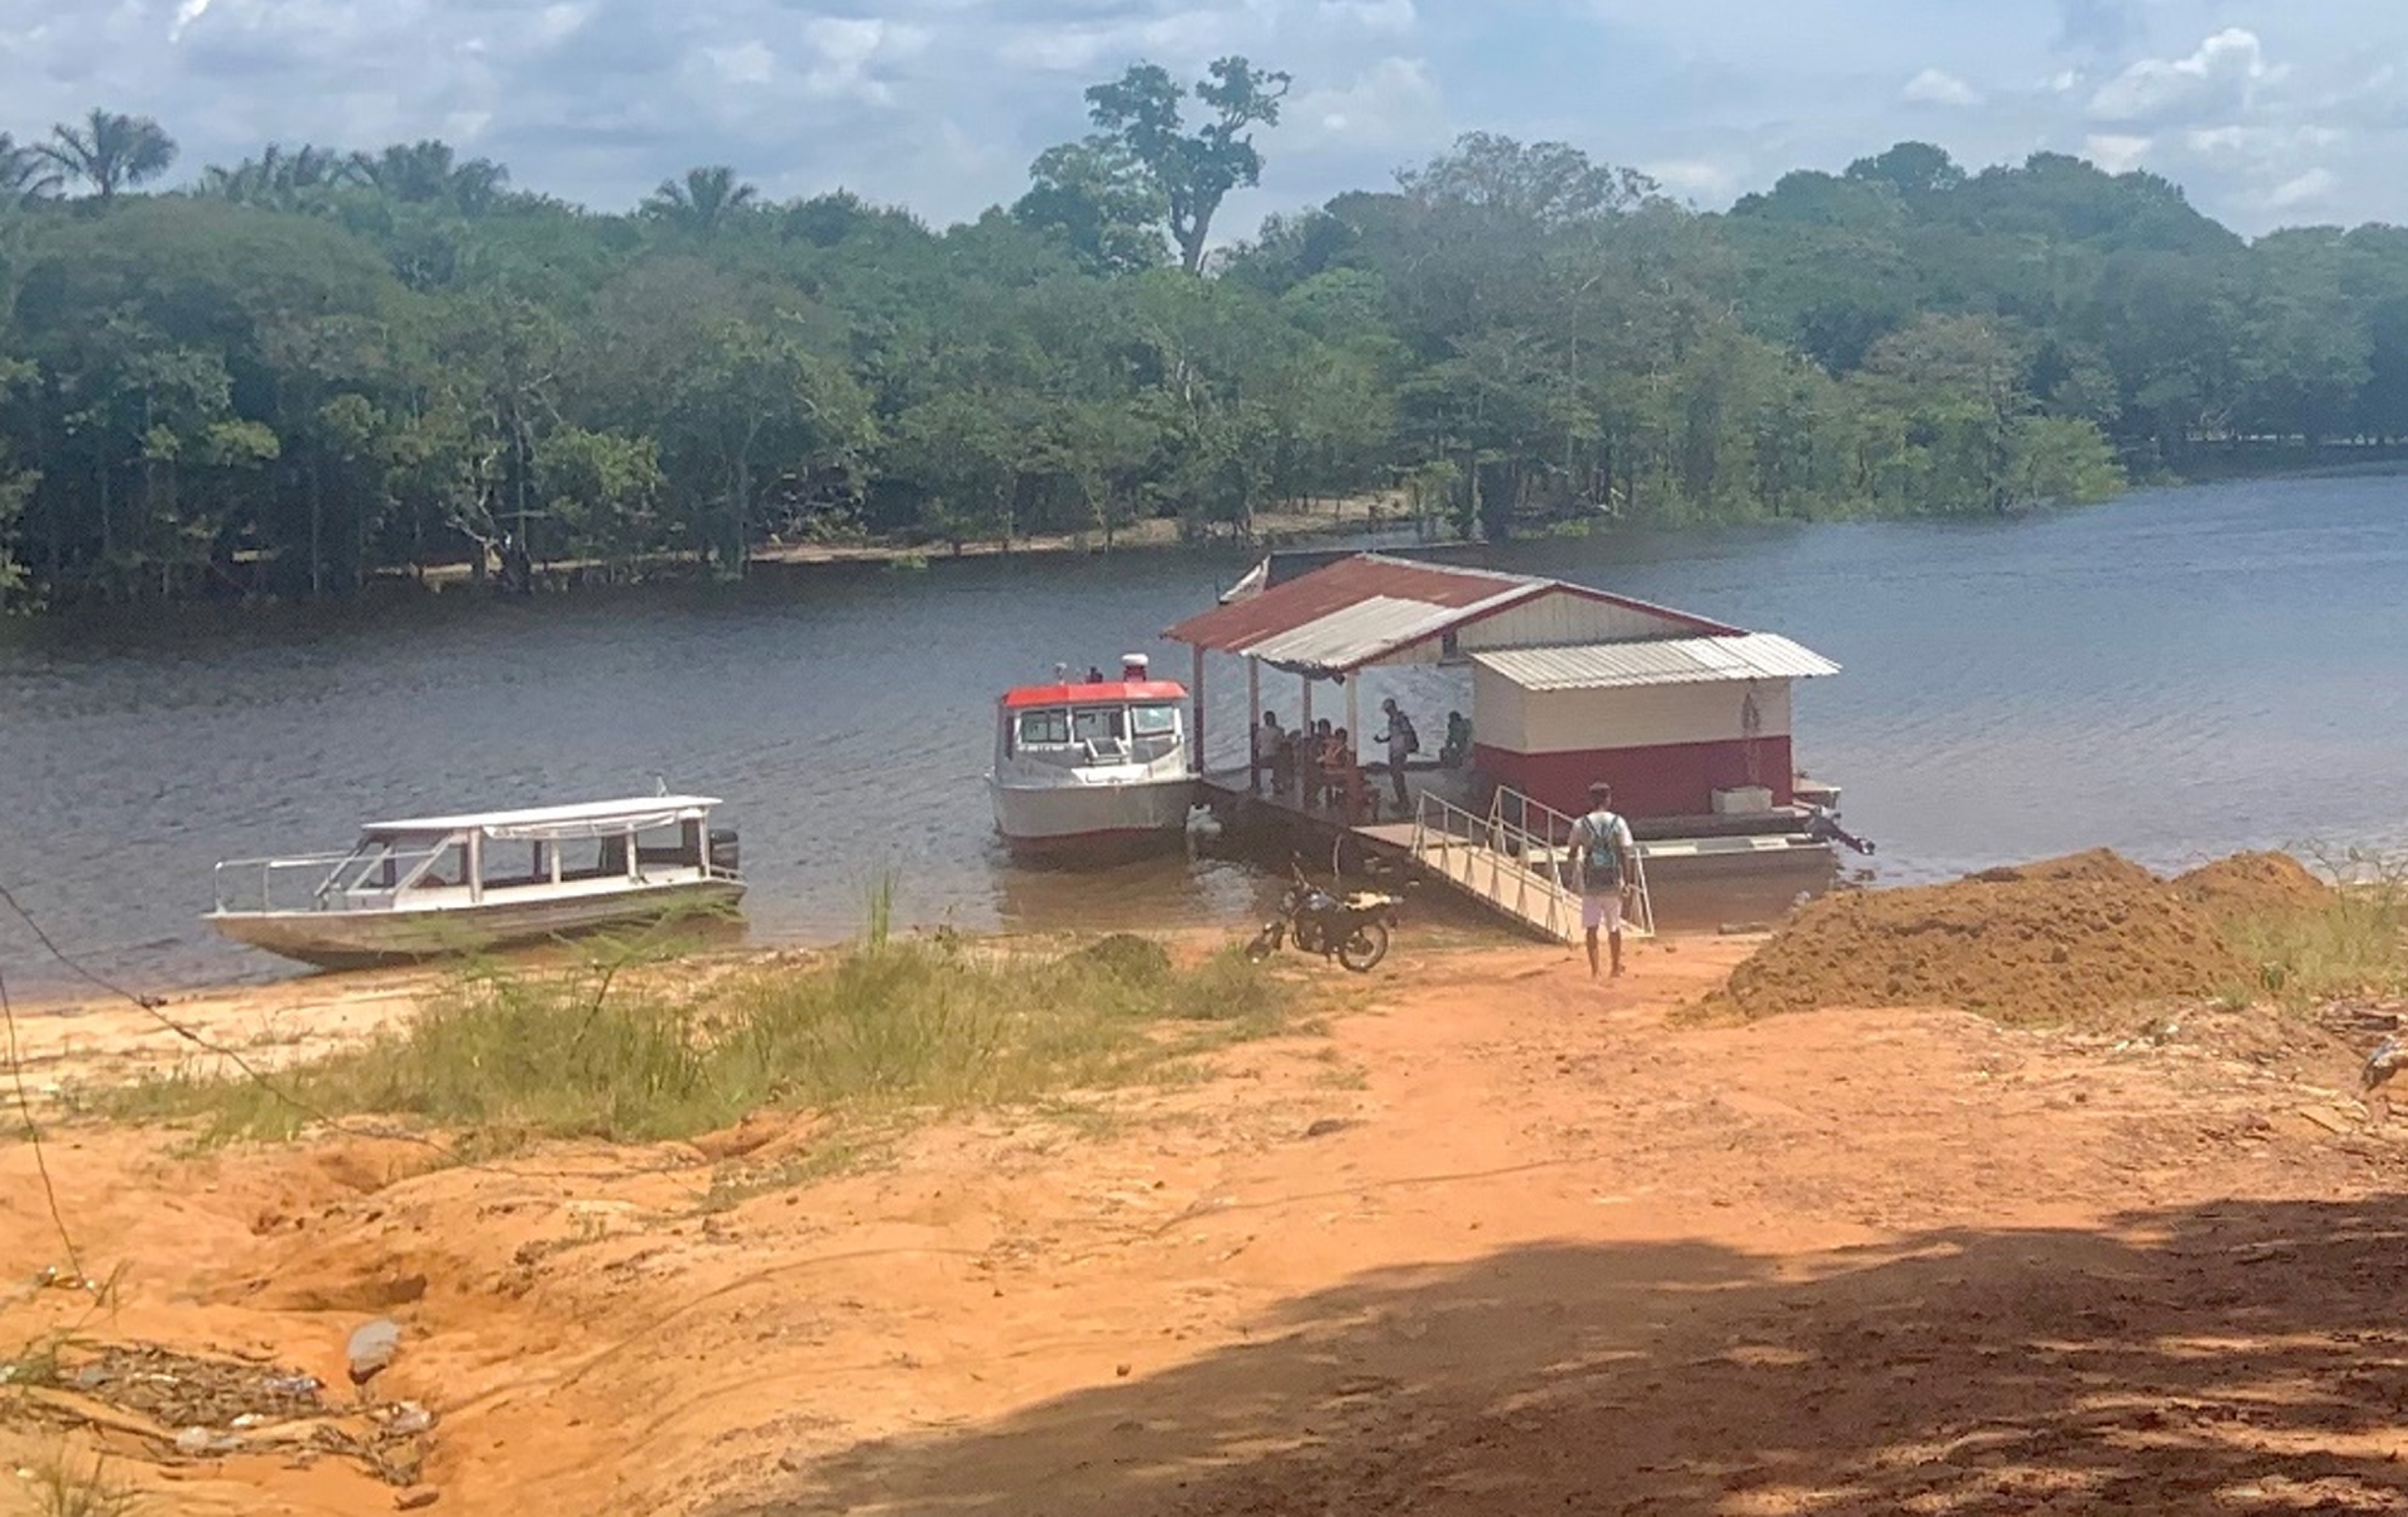 Water ambulance docked at mooring spot for the community of Fátima, located 30 min upriver from Manaus and one of the few communities with docking sites.